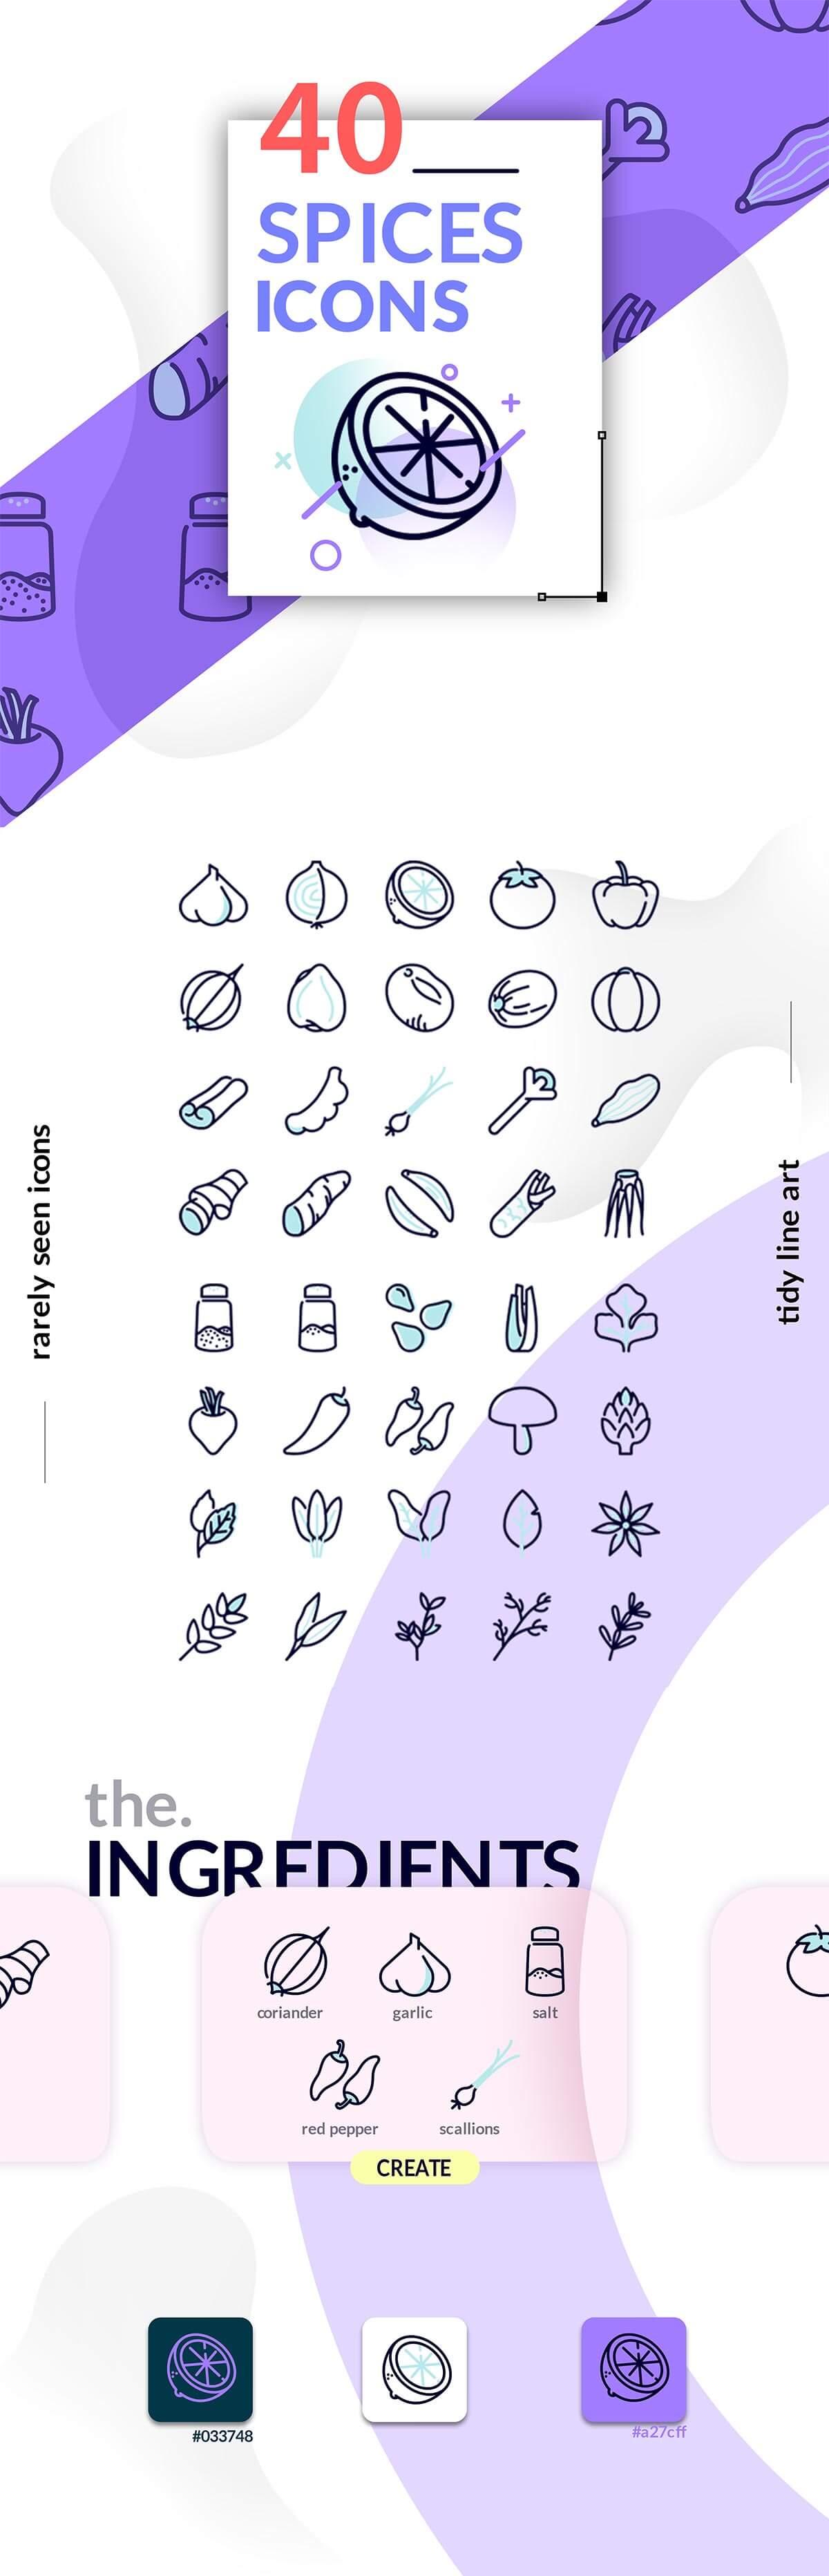 40 Free Spices Icons